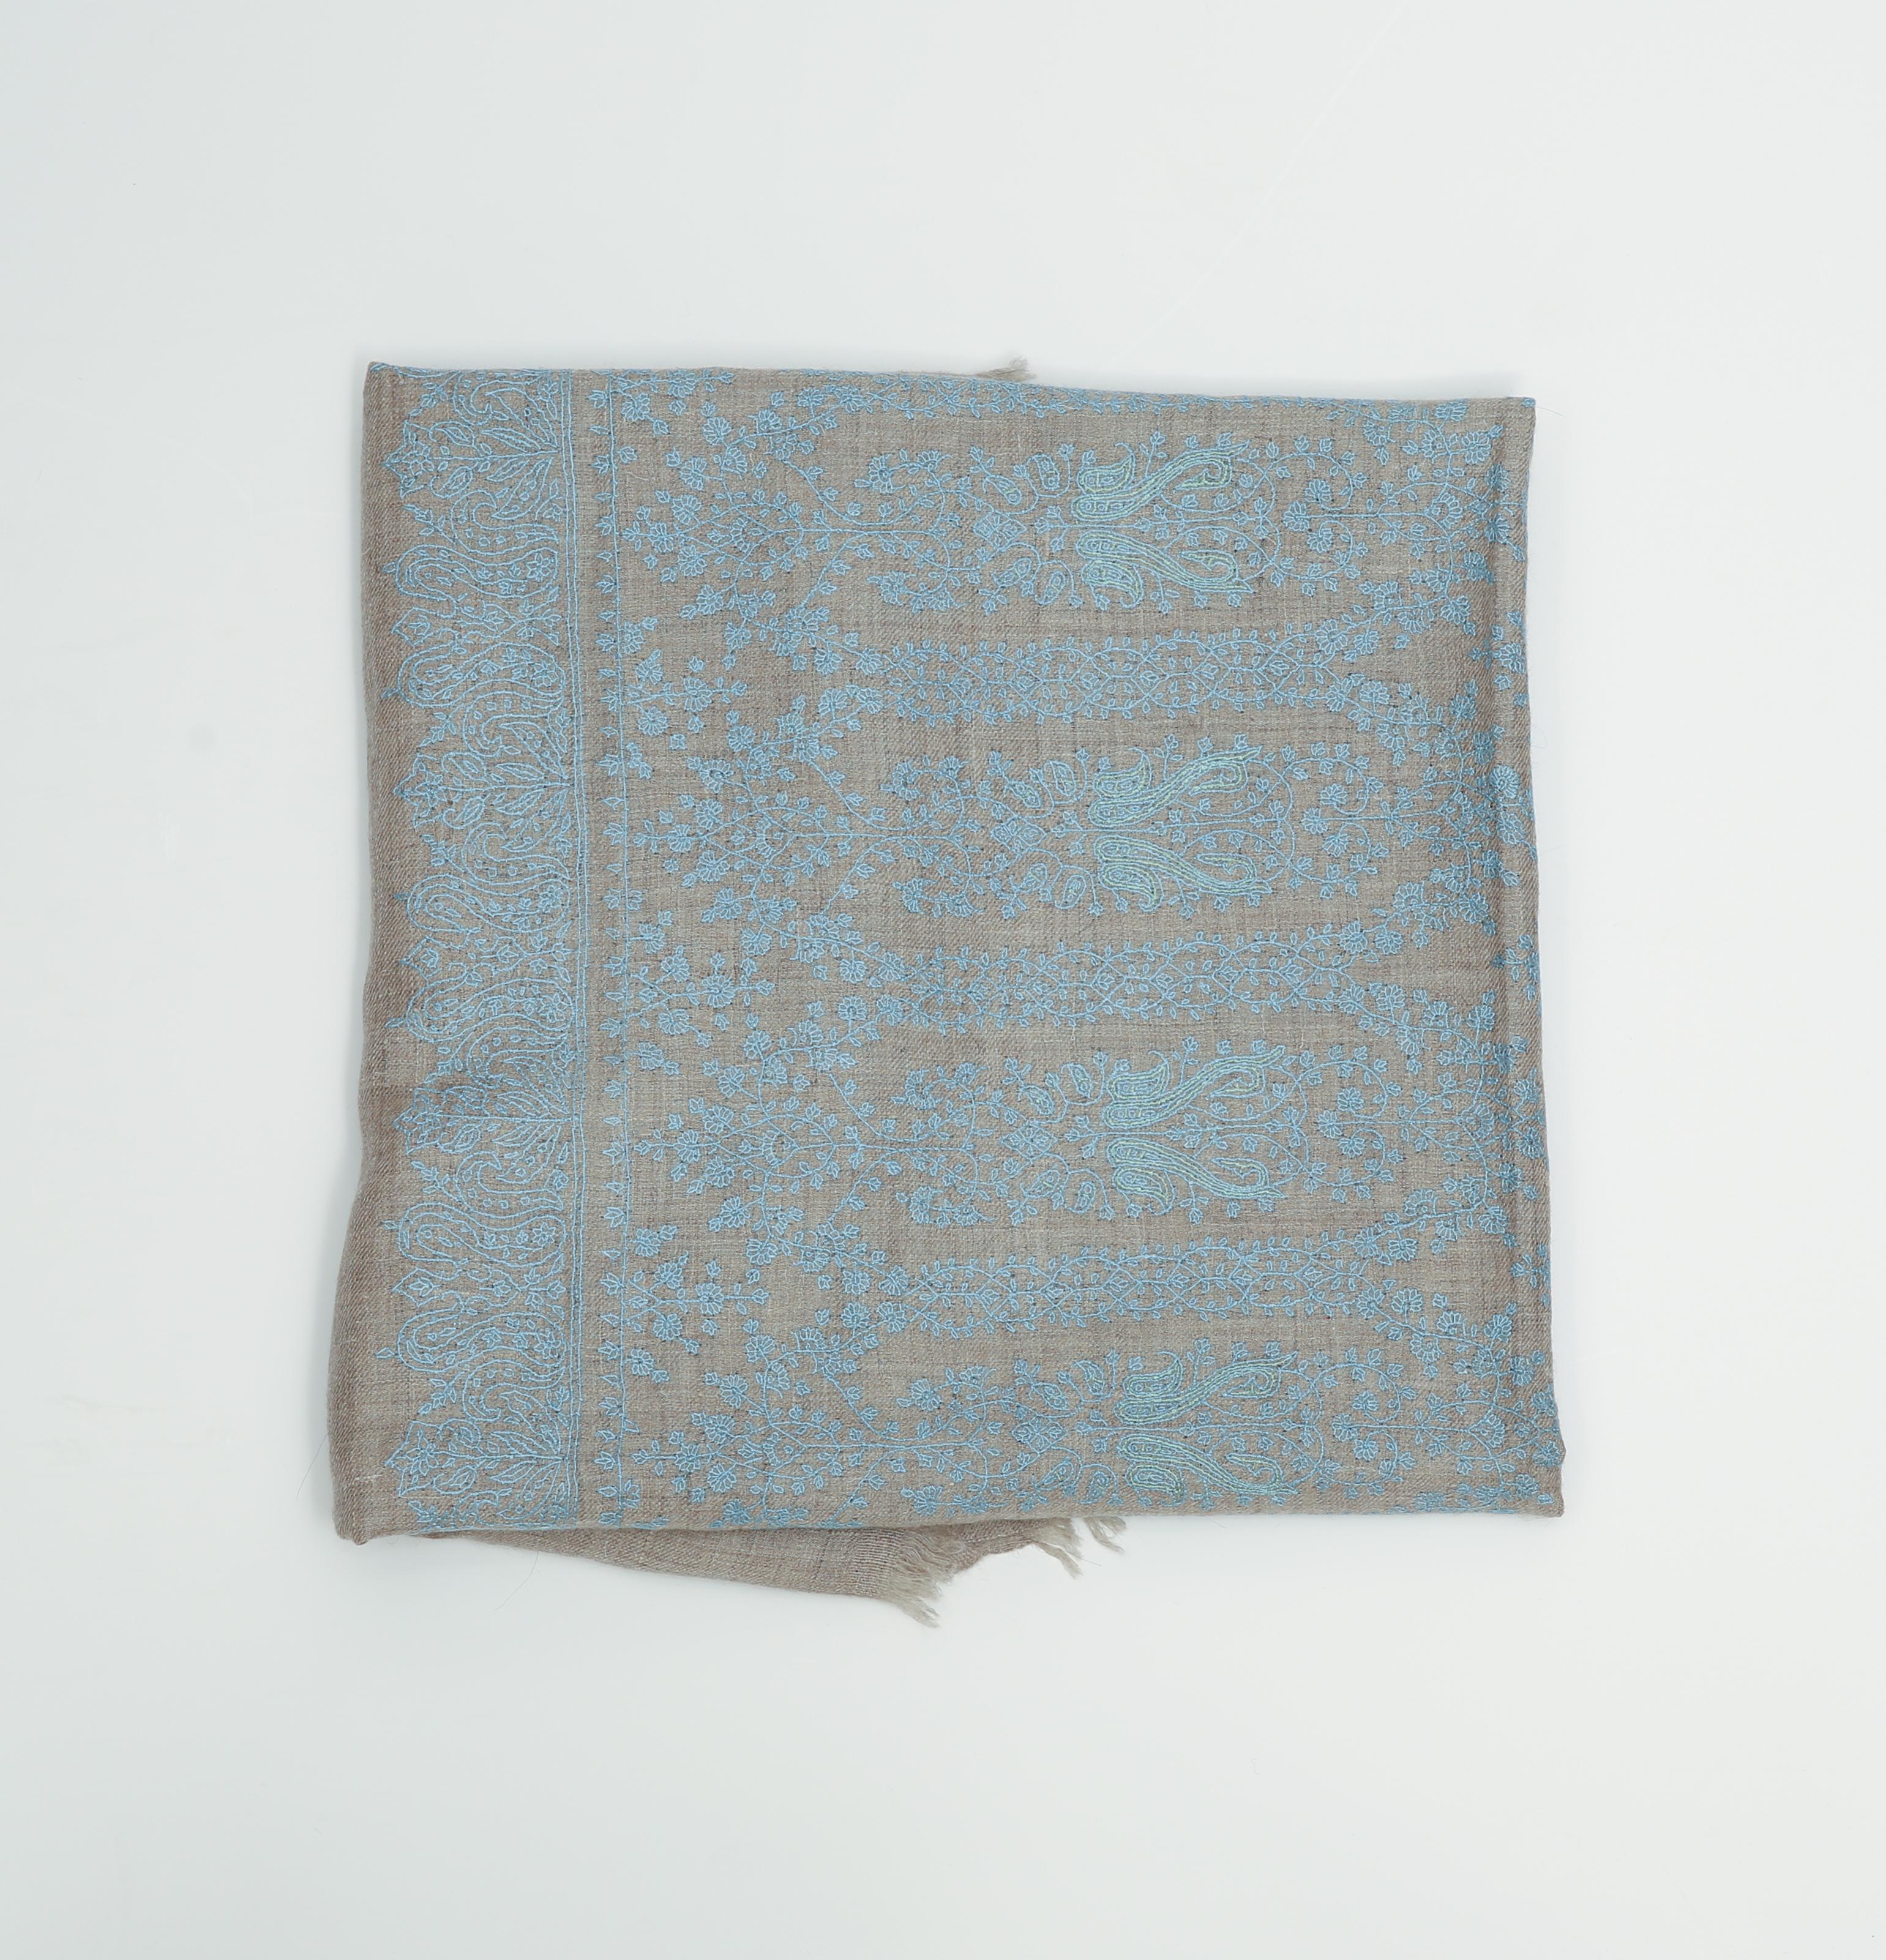 Hand Embroidered Cashmere Scarf in Taupe & Blue Made in Kashmir India -Brand New im Zustand „Neu“ in London, GB